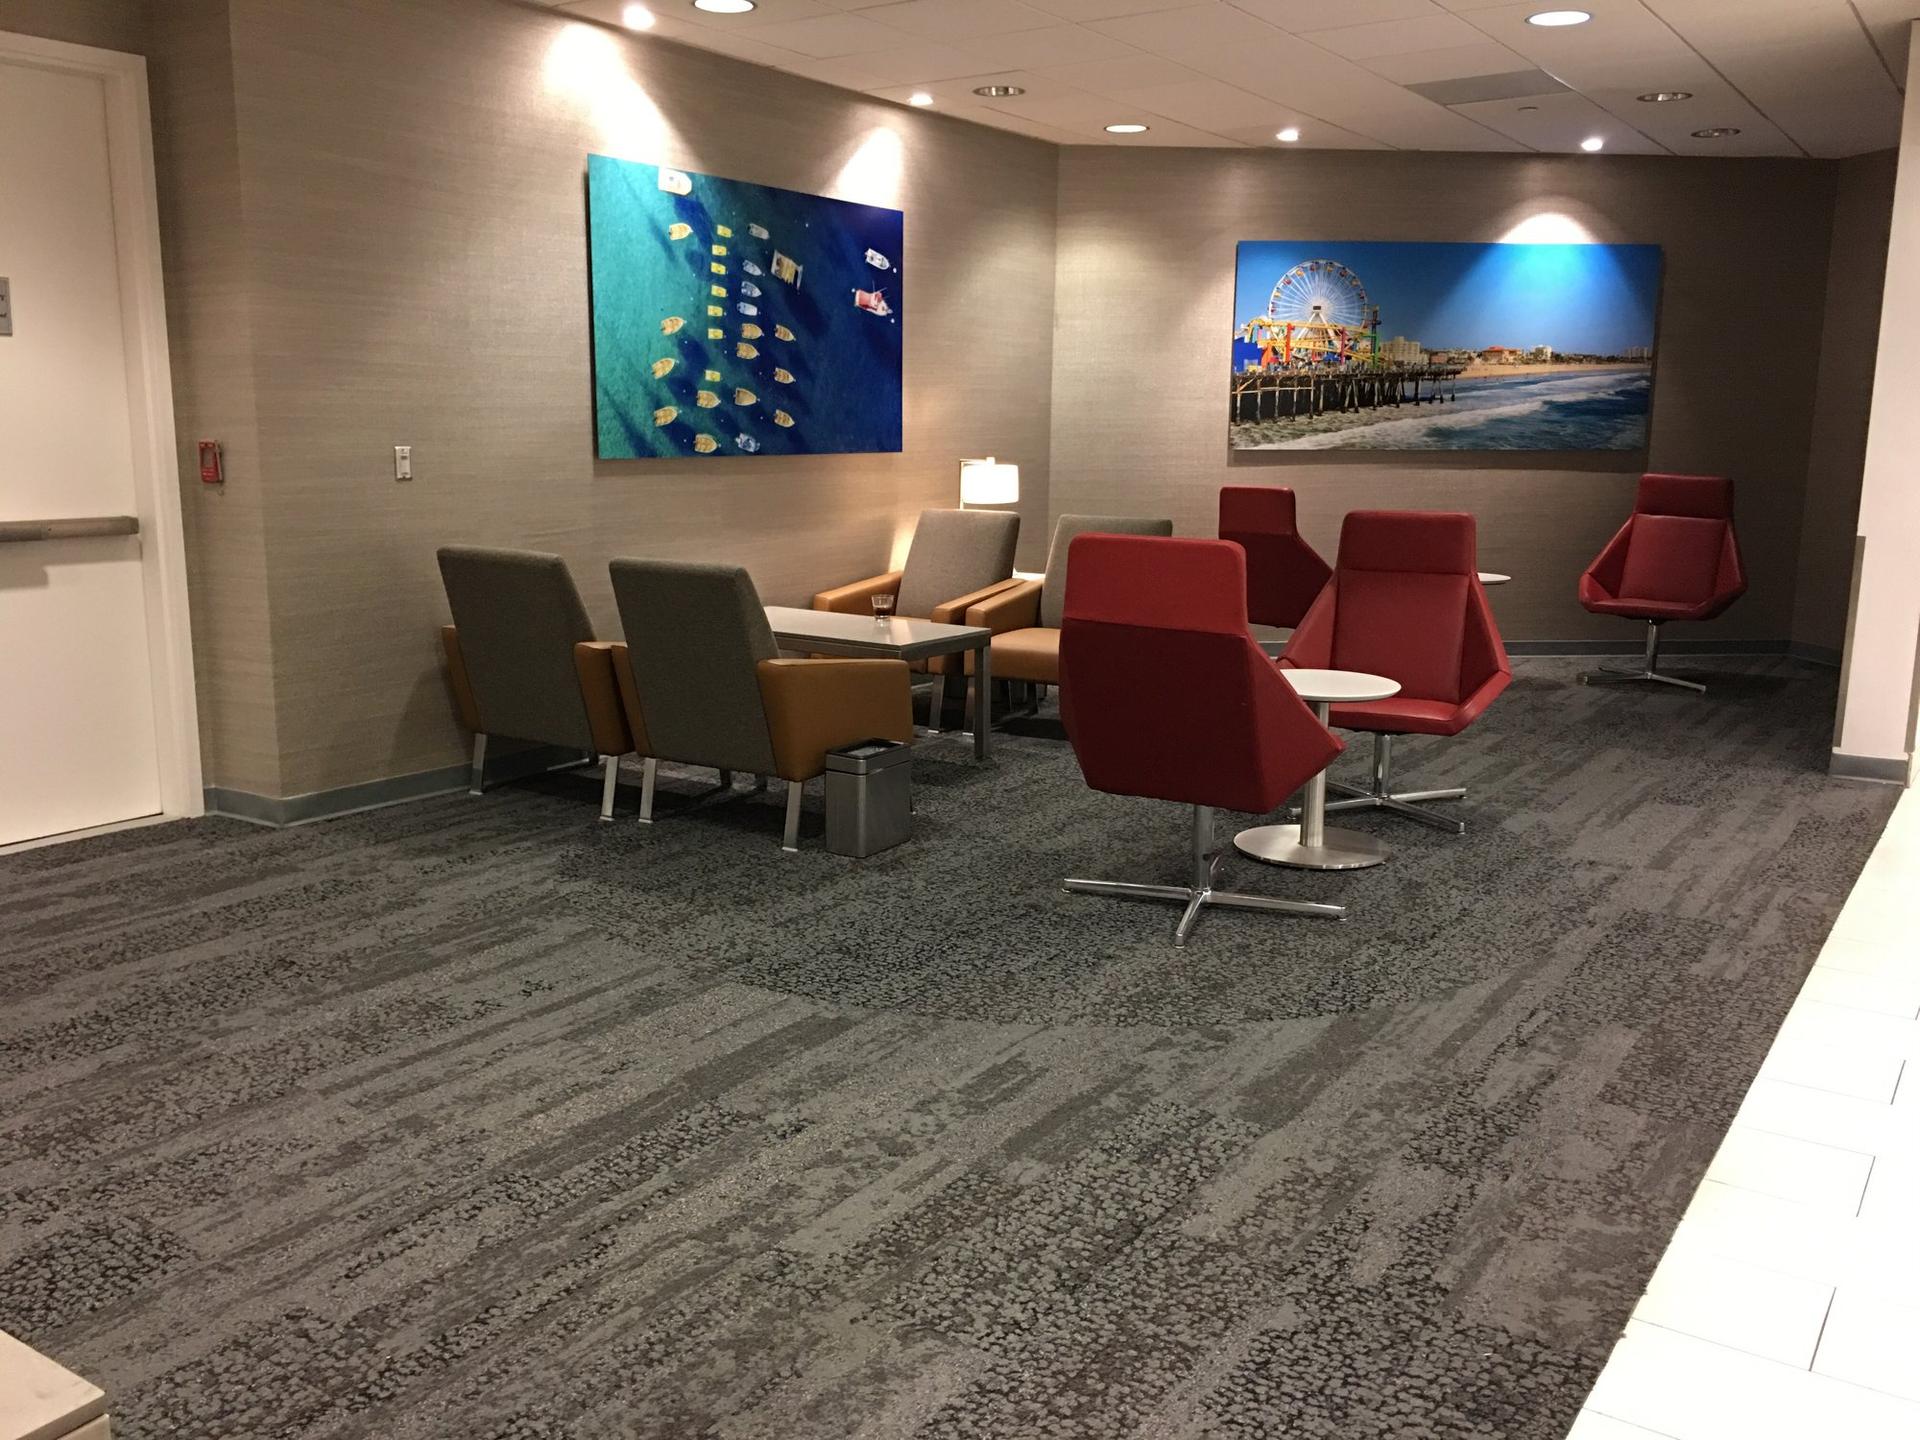 American Airlines Admirals Club image 1 of 38